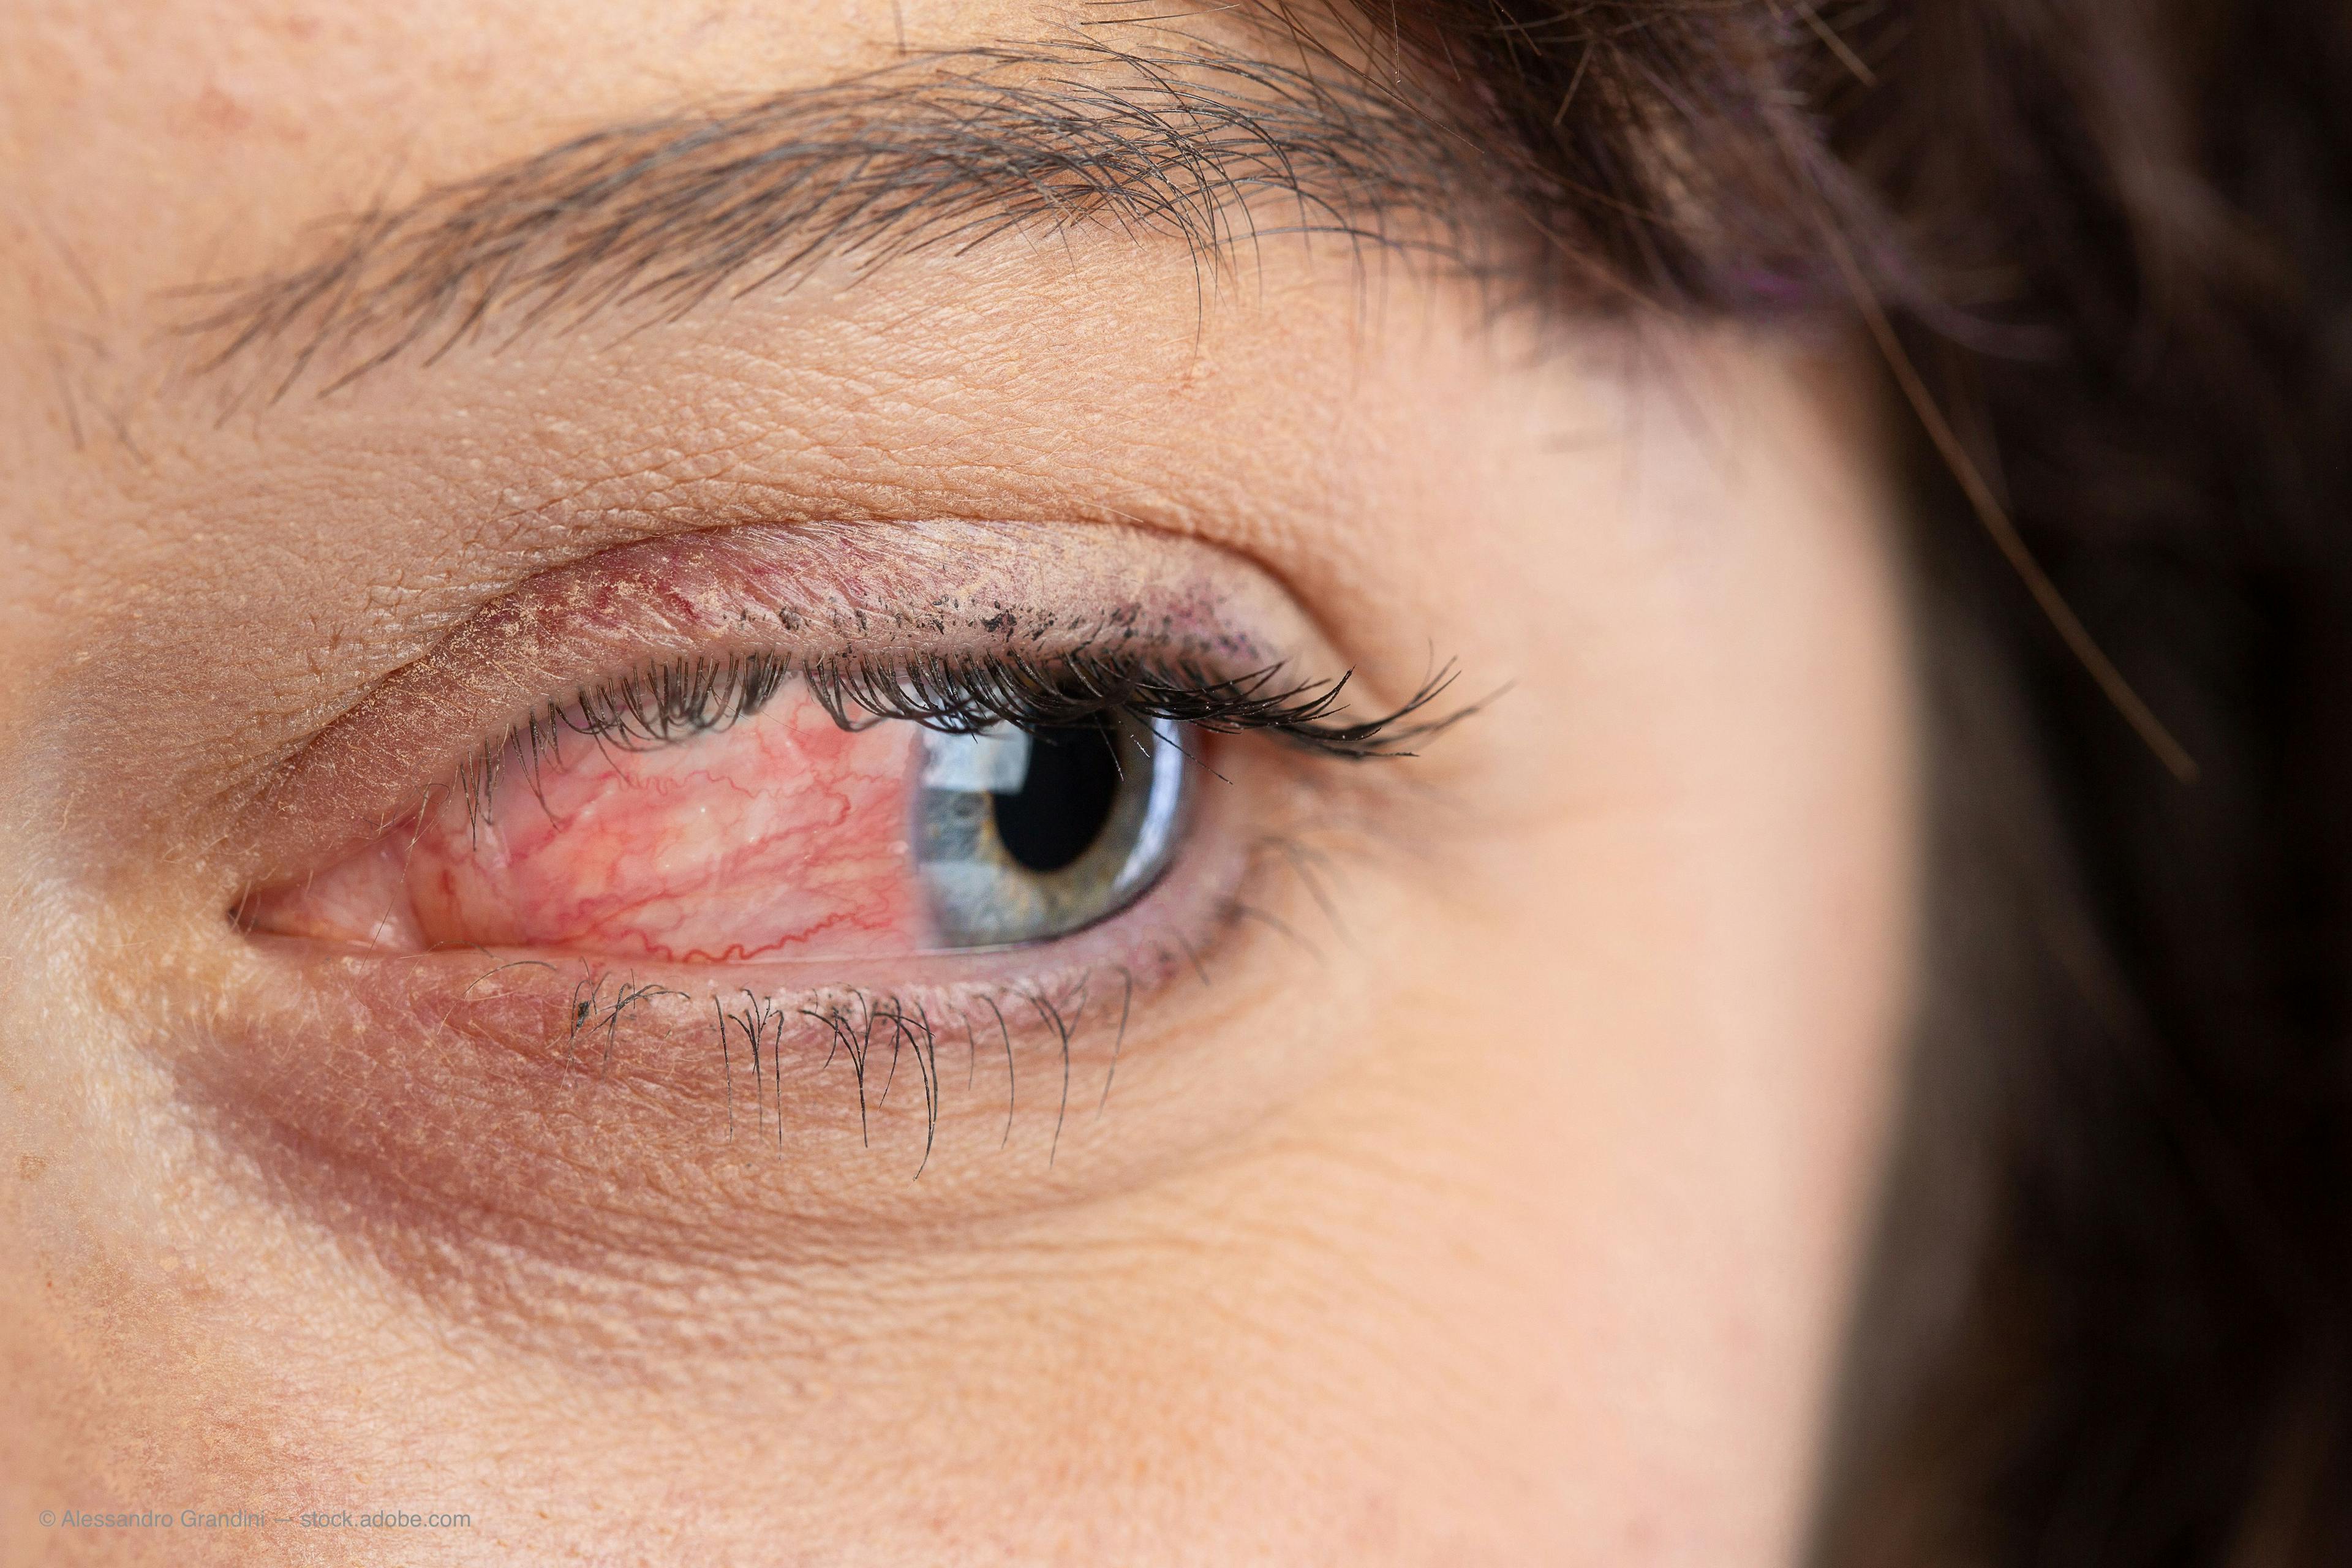 VA, visual function are going the way of ocular inflammation